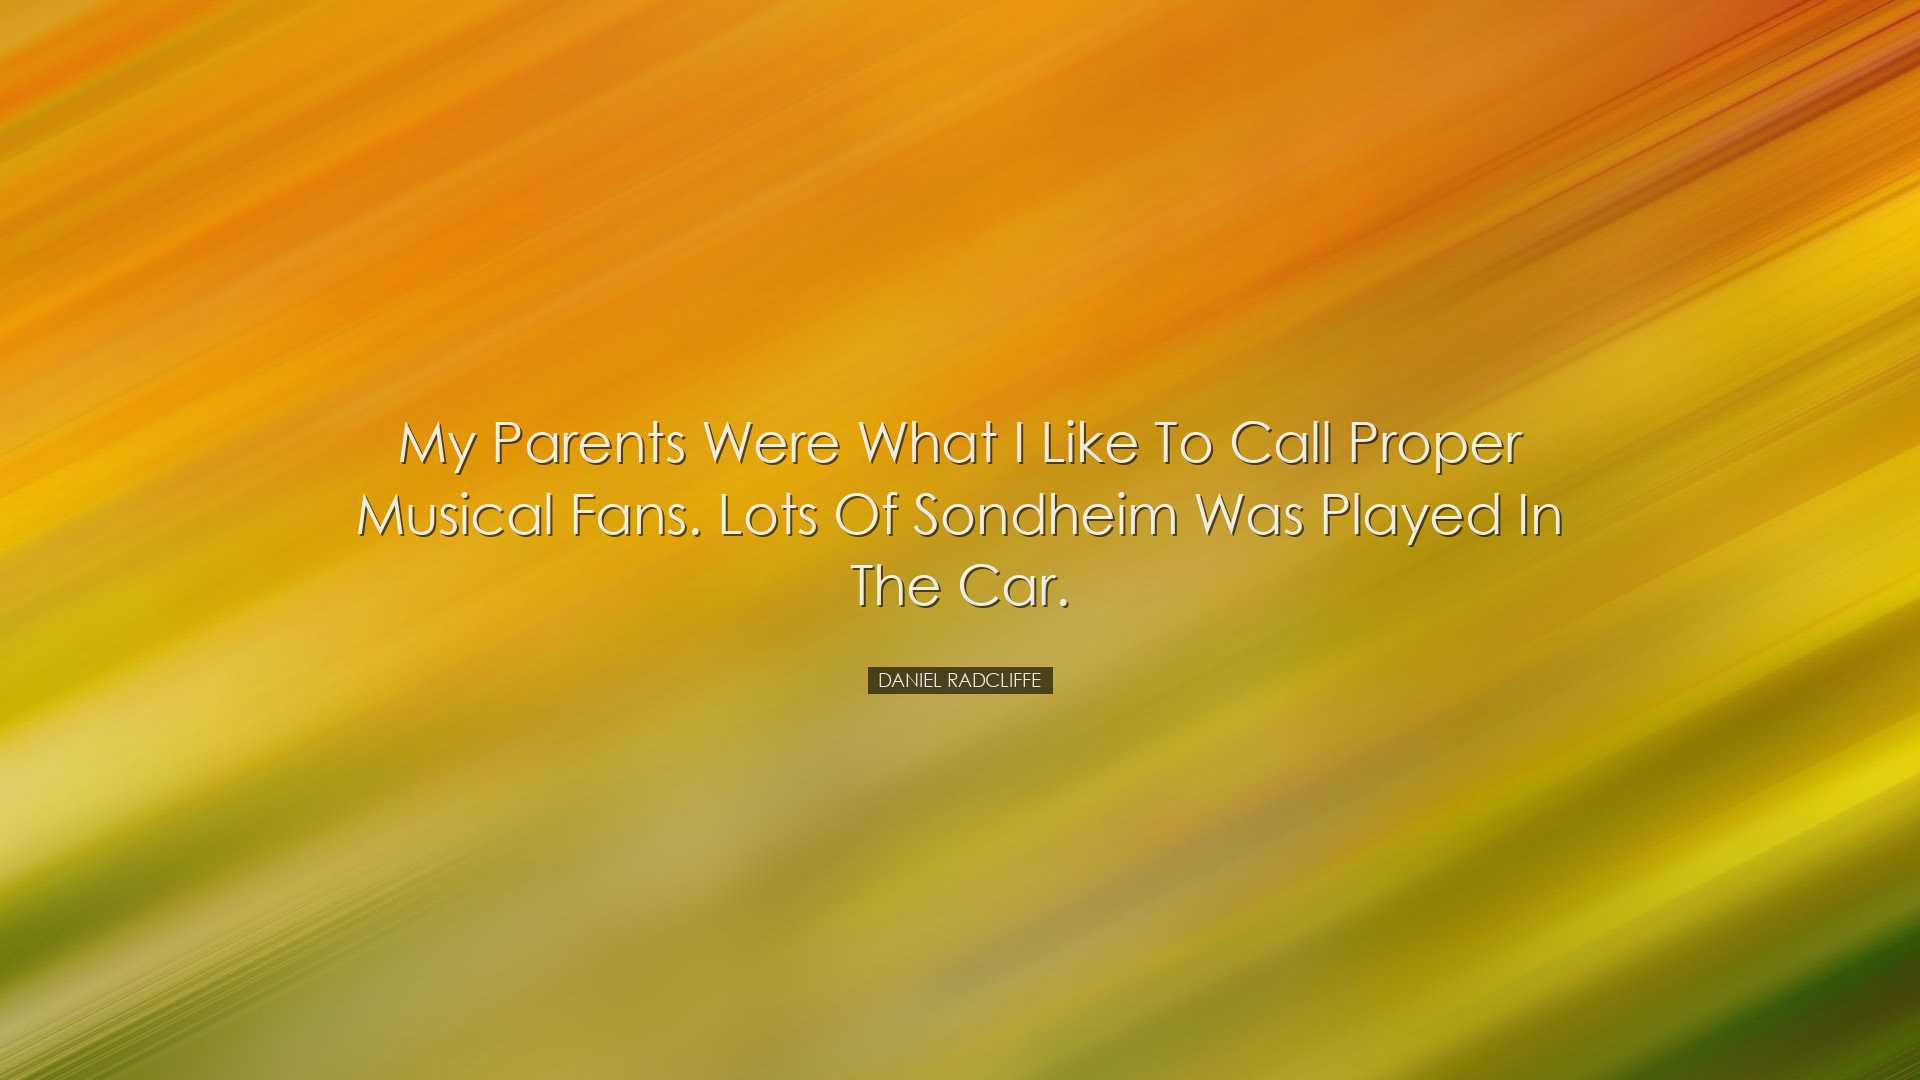 My parents were what I like to call proper musical fans. Lots of S